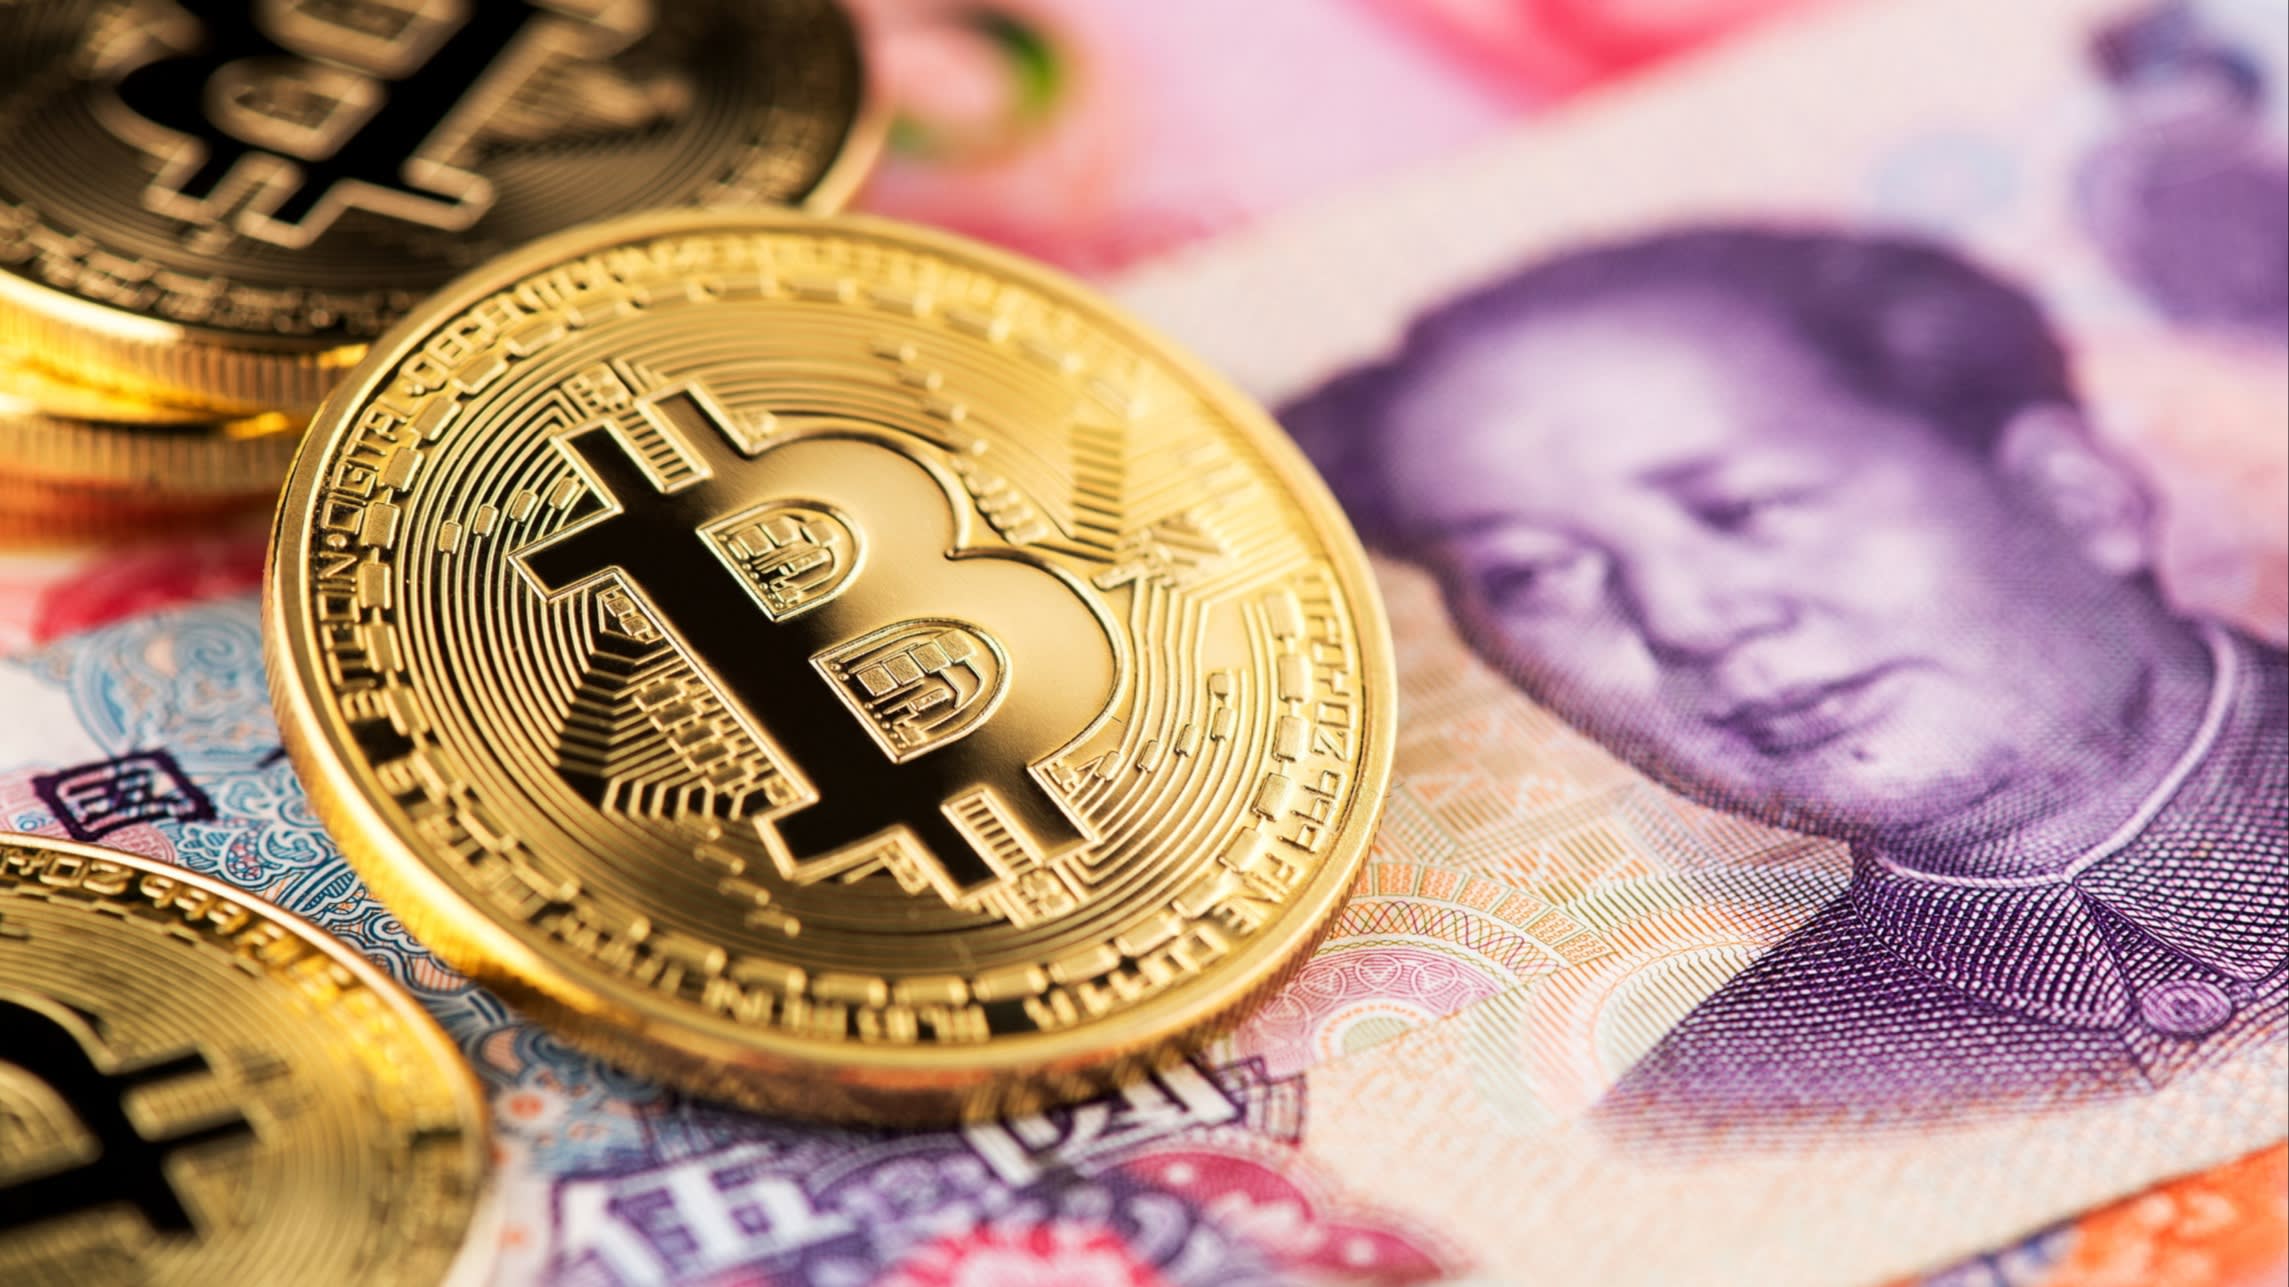 China to shut down over 90% of its Bitcoin mining capacity after local bans - Global Times